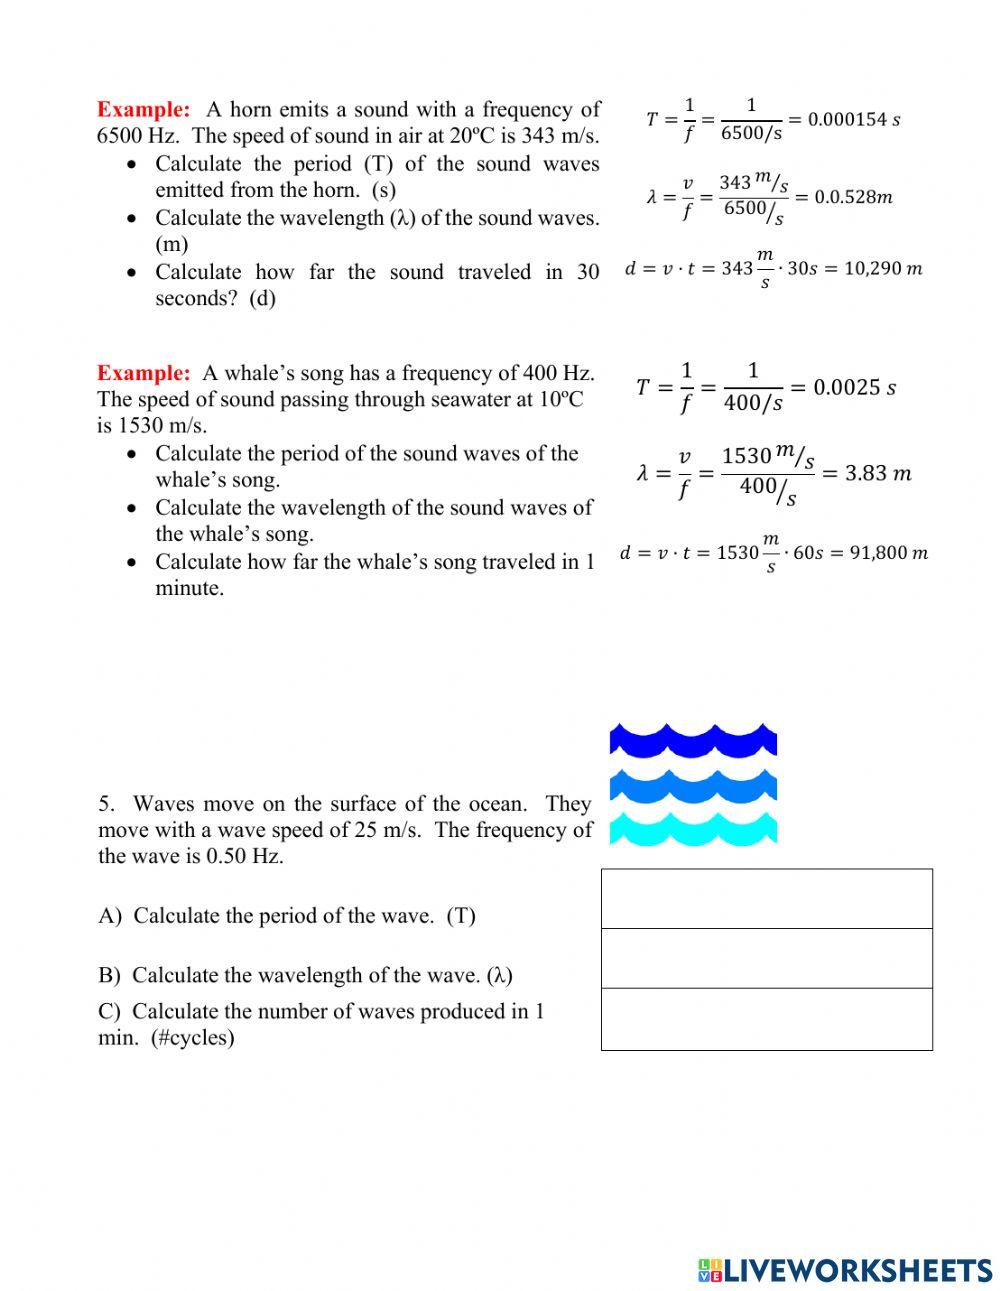 Calculating Parameters of Waves